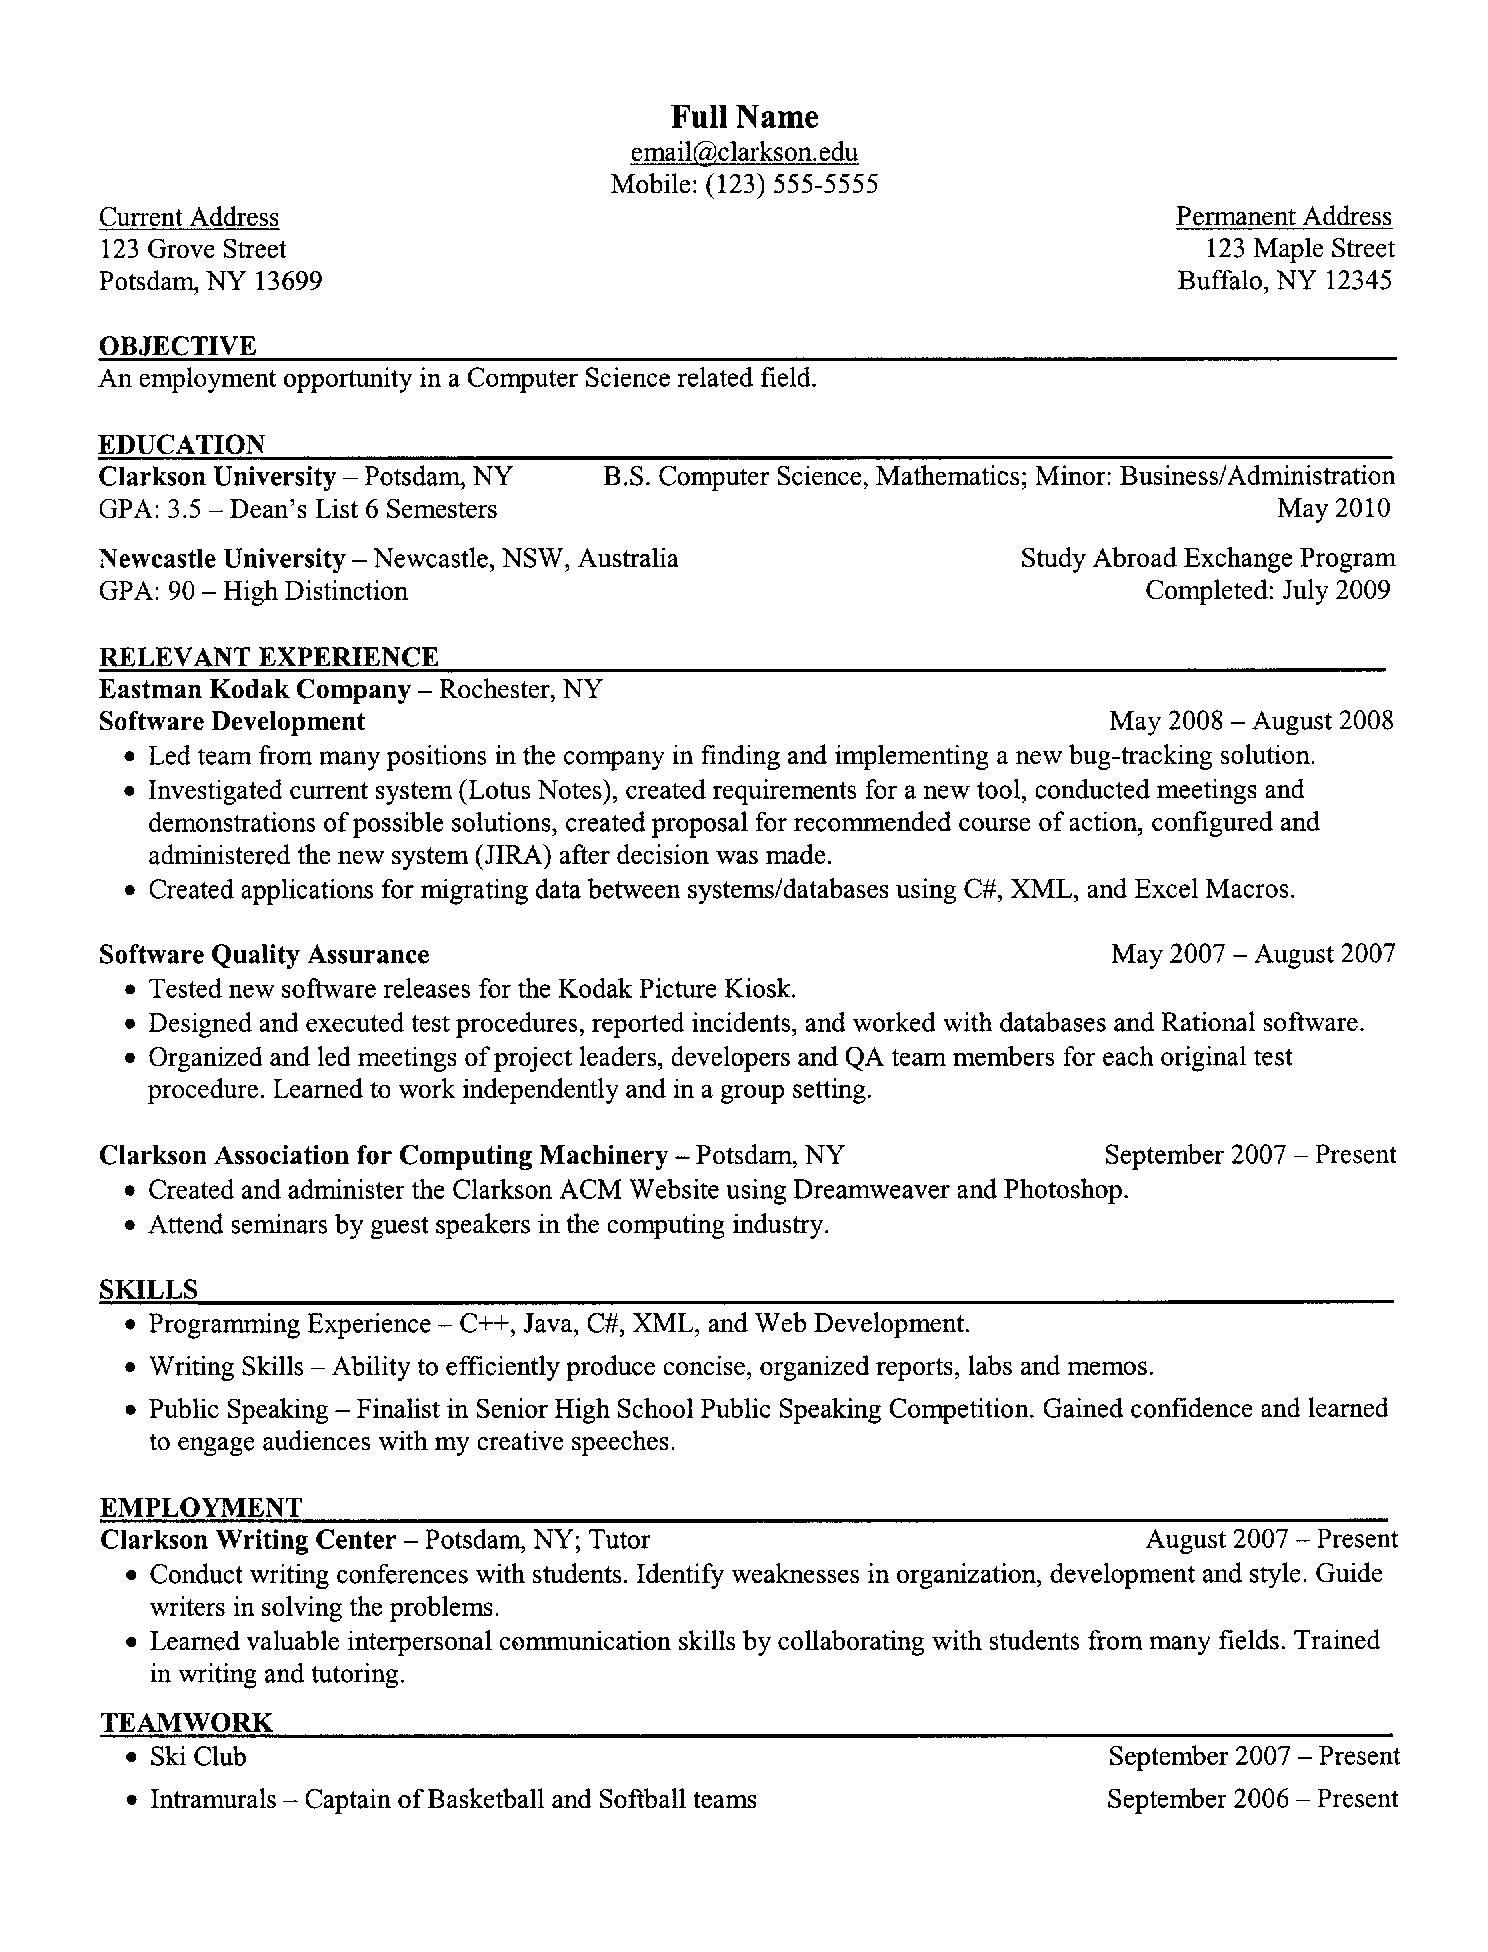 Resume Objective Example Electrical Engineer Resume Objective New Survey Entry Apologize The Spacing Example Made Way Wallpapers Mpg Criminal Justice Accounting Examples Format Freshers Engineers Car resume objective example|wikiresume.com